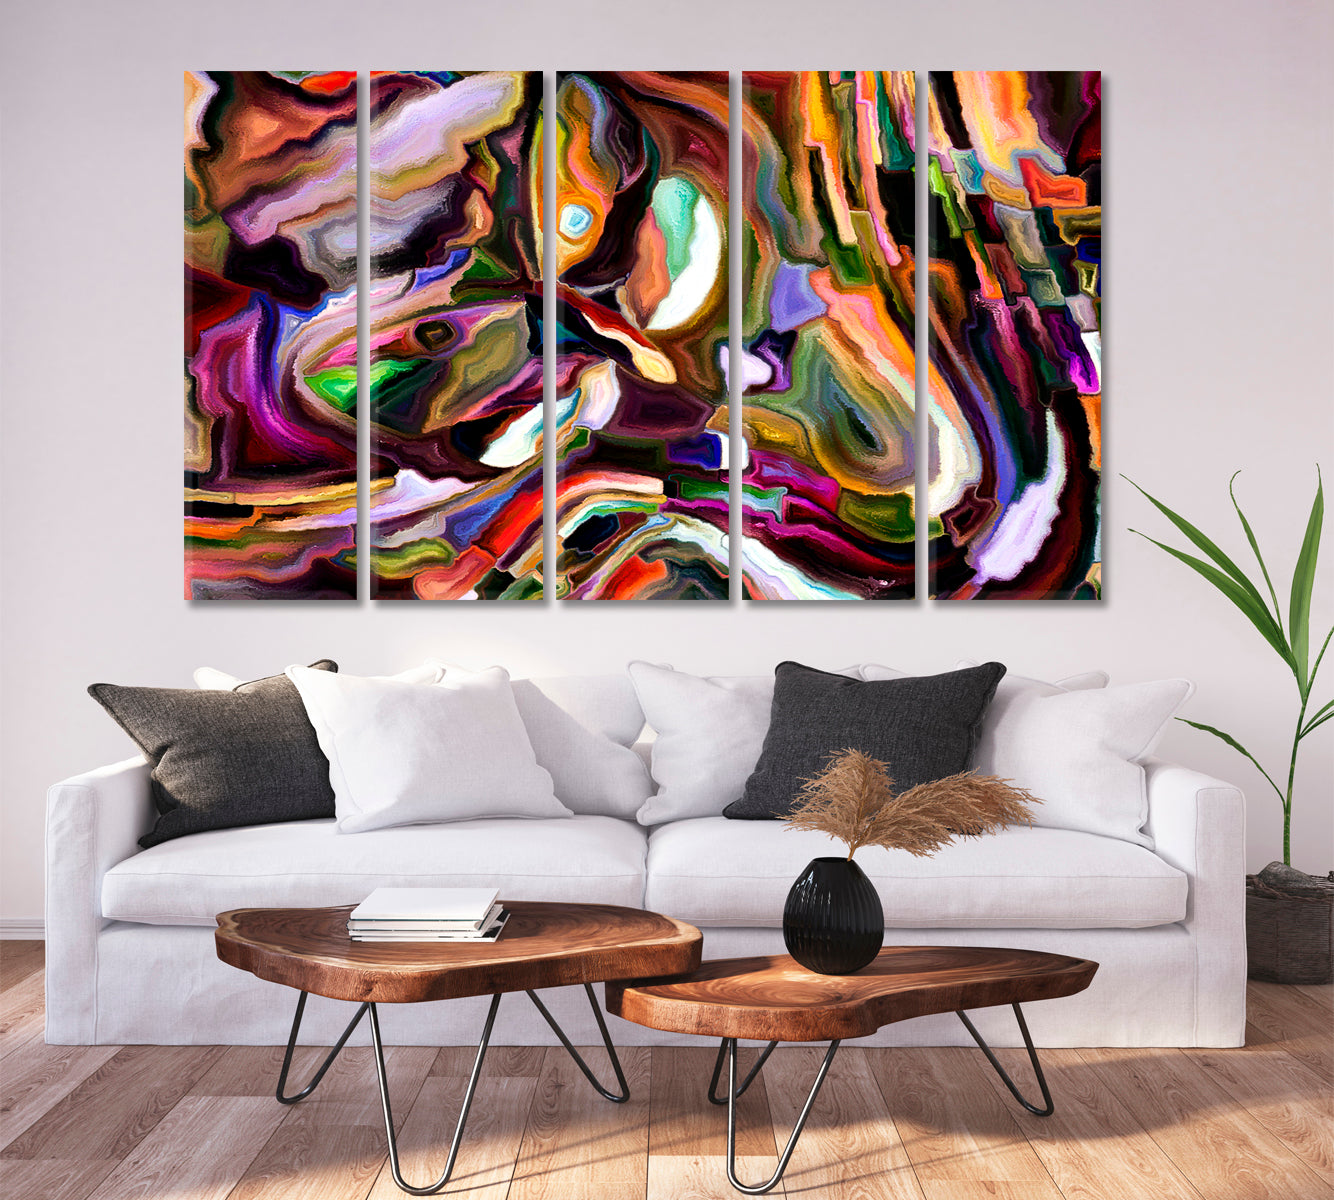 Nature In Colors And Shapes Abstract Pattern Abstract Art Print Artesty 5 panels 36" x 24" 